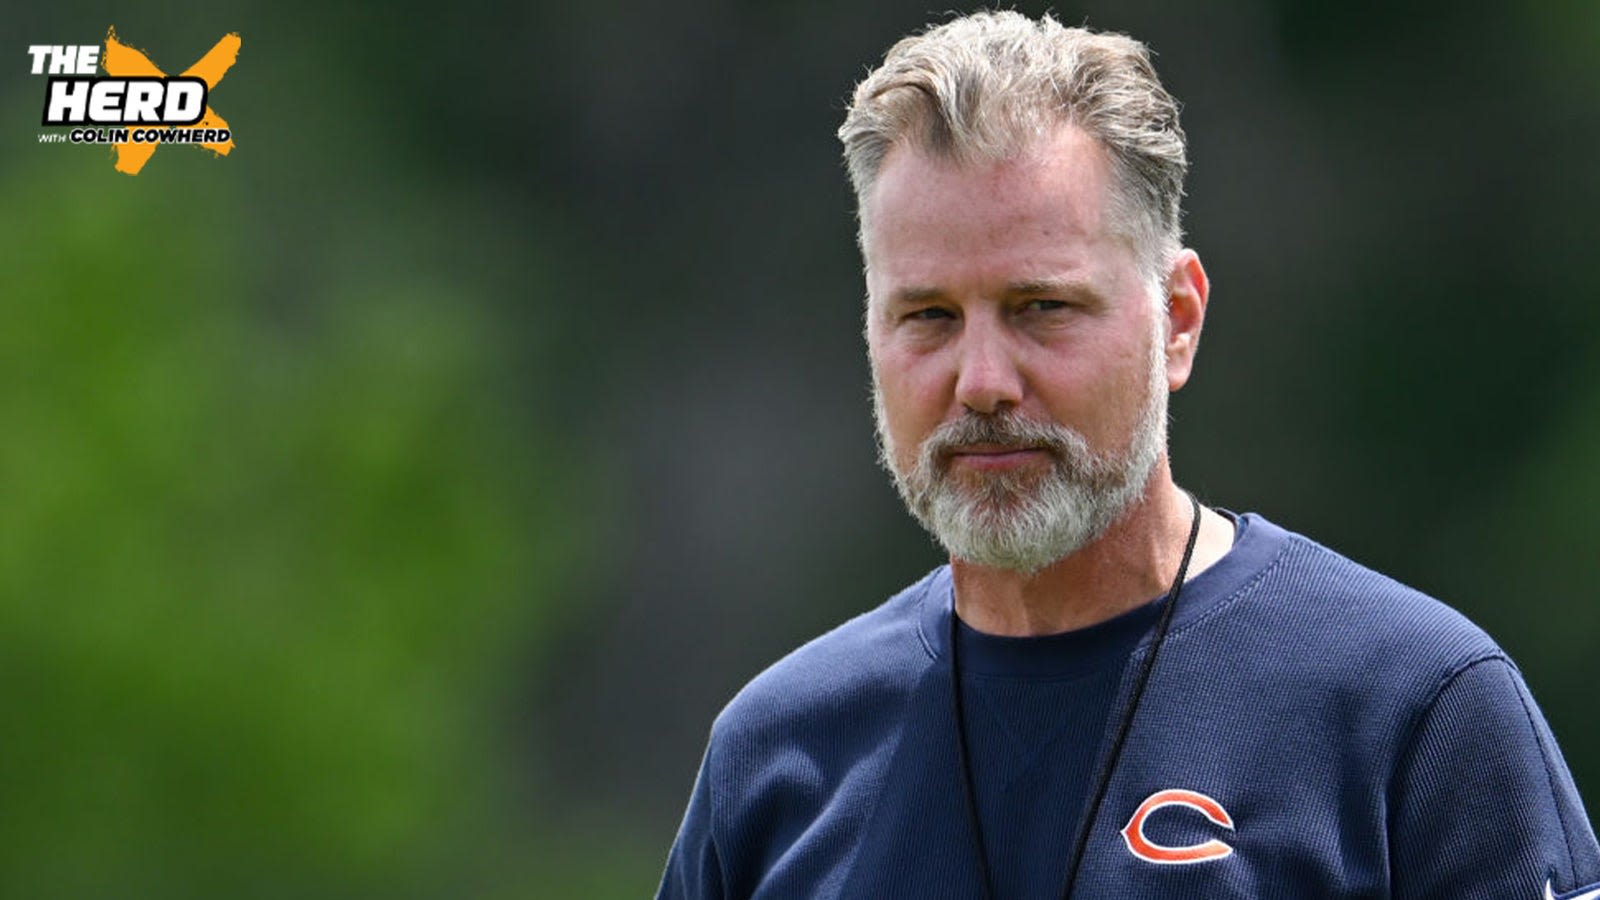 'Hard Knocks' preview: Key storylines to follow at Bears training camp